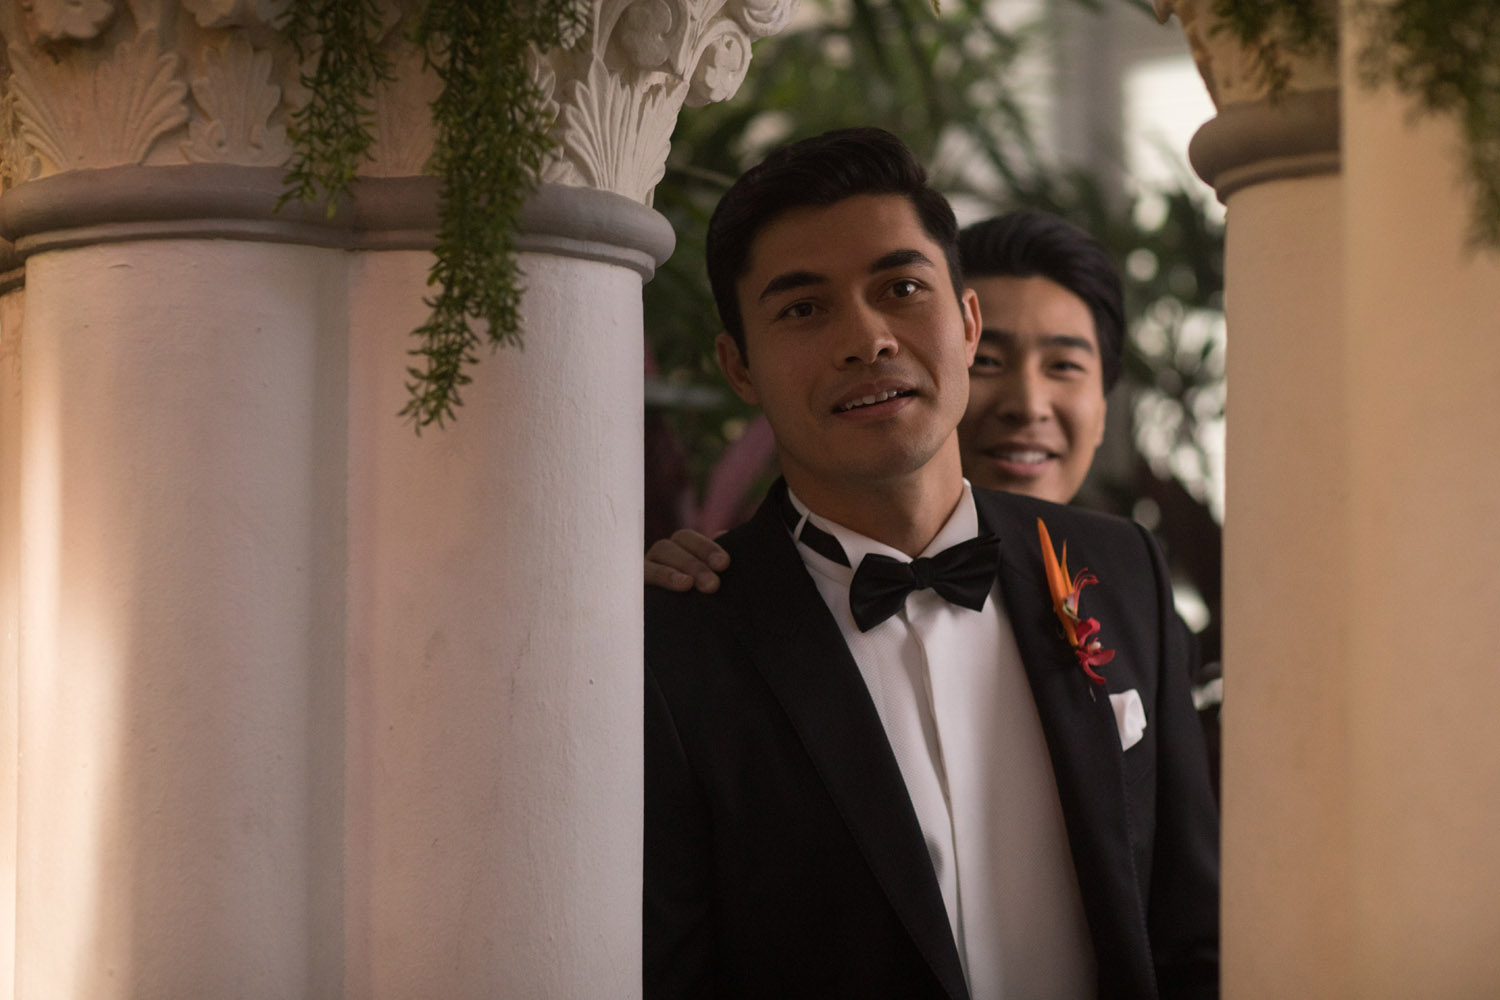 HEIR. Nick Young (Henry Golding) looks smart in a tux. Image courtesy of Warner Bros. Entertainment Inc. and RatPac-Dune Entertainment LLC 